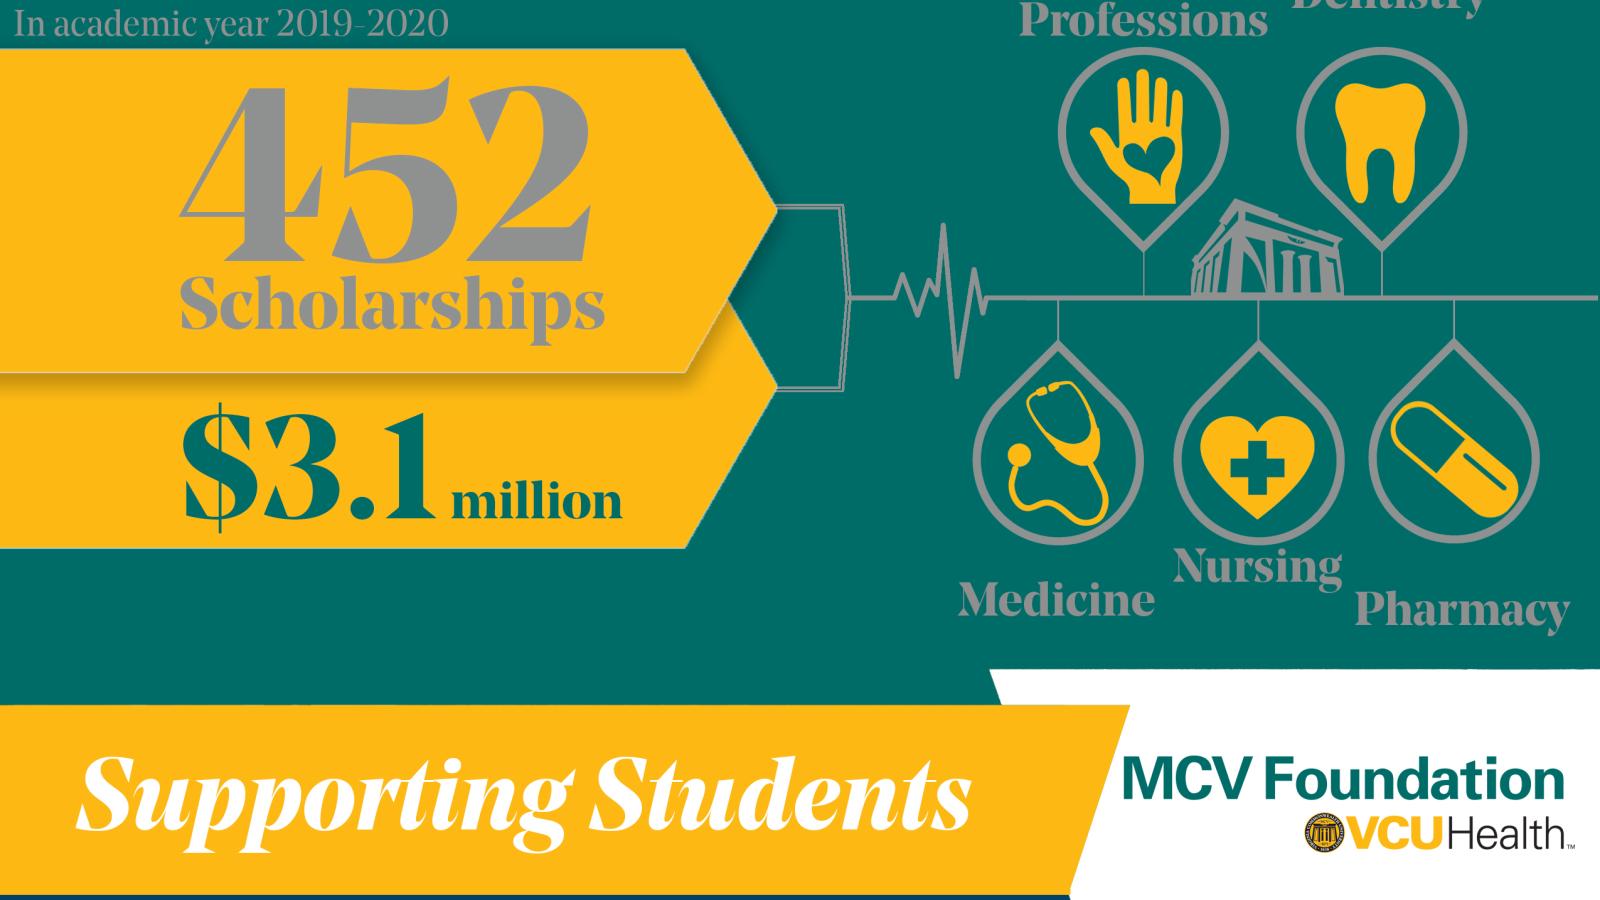 This year, donors accounted for 452 scholarships, which is 39 more than last year. Through these endowed scholarships, students from all five academic units on the MCV Campus had access to $3.1 million in funding and support.